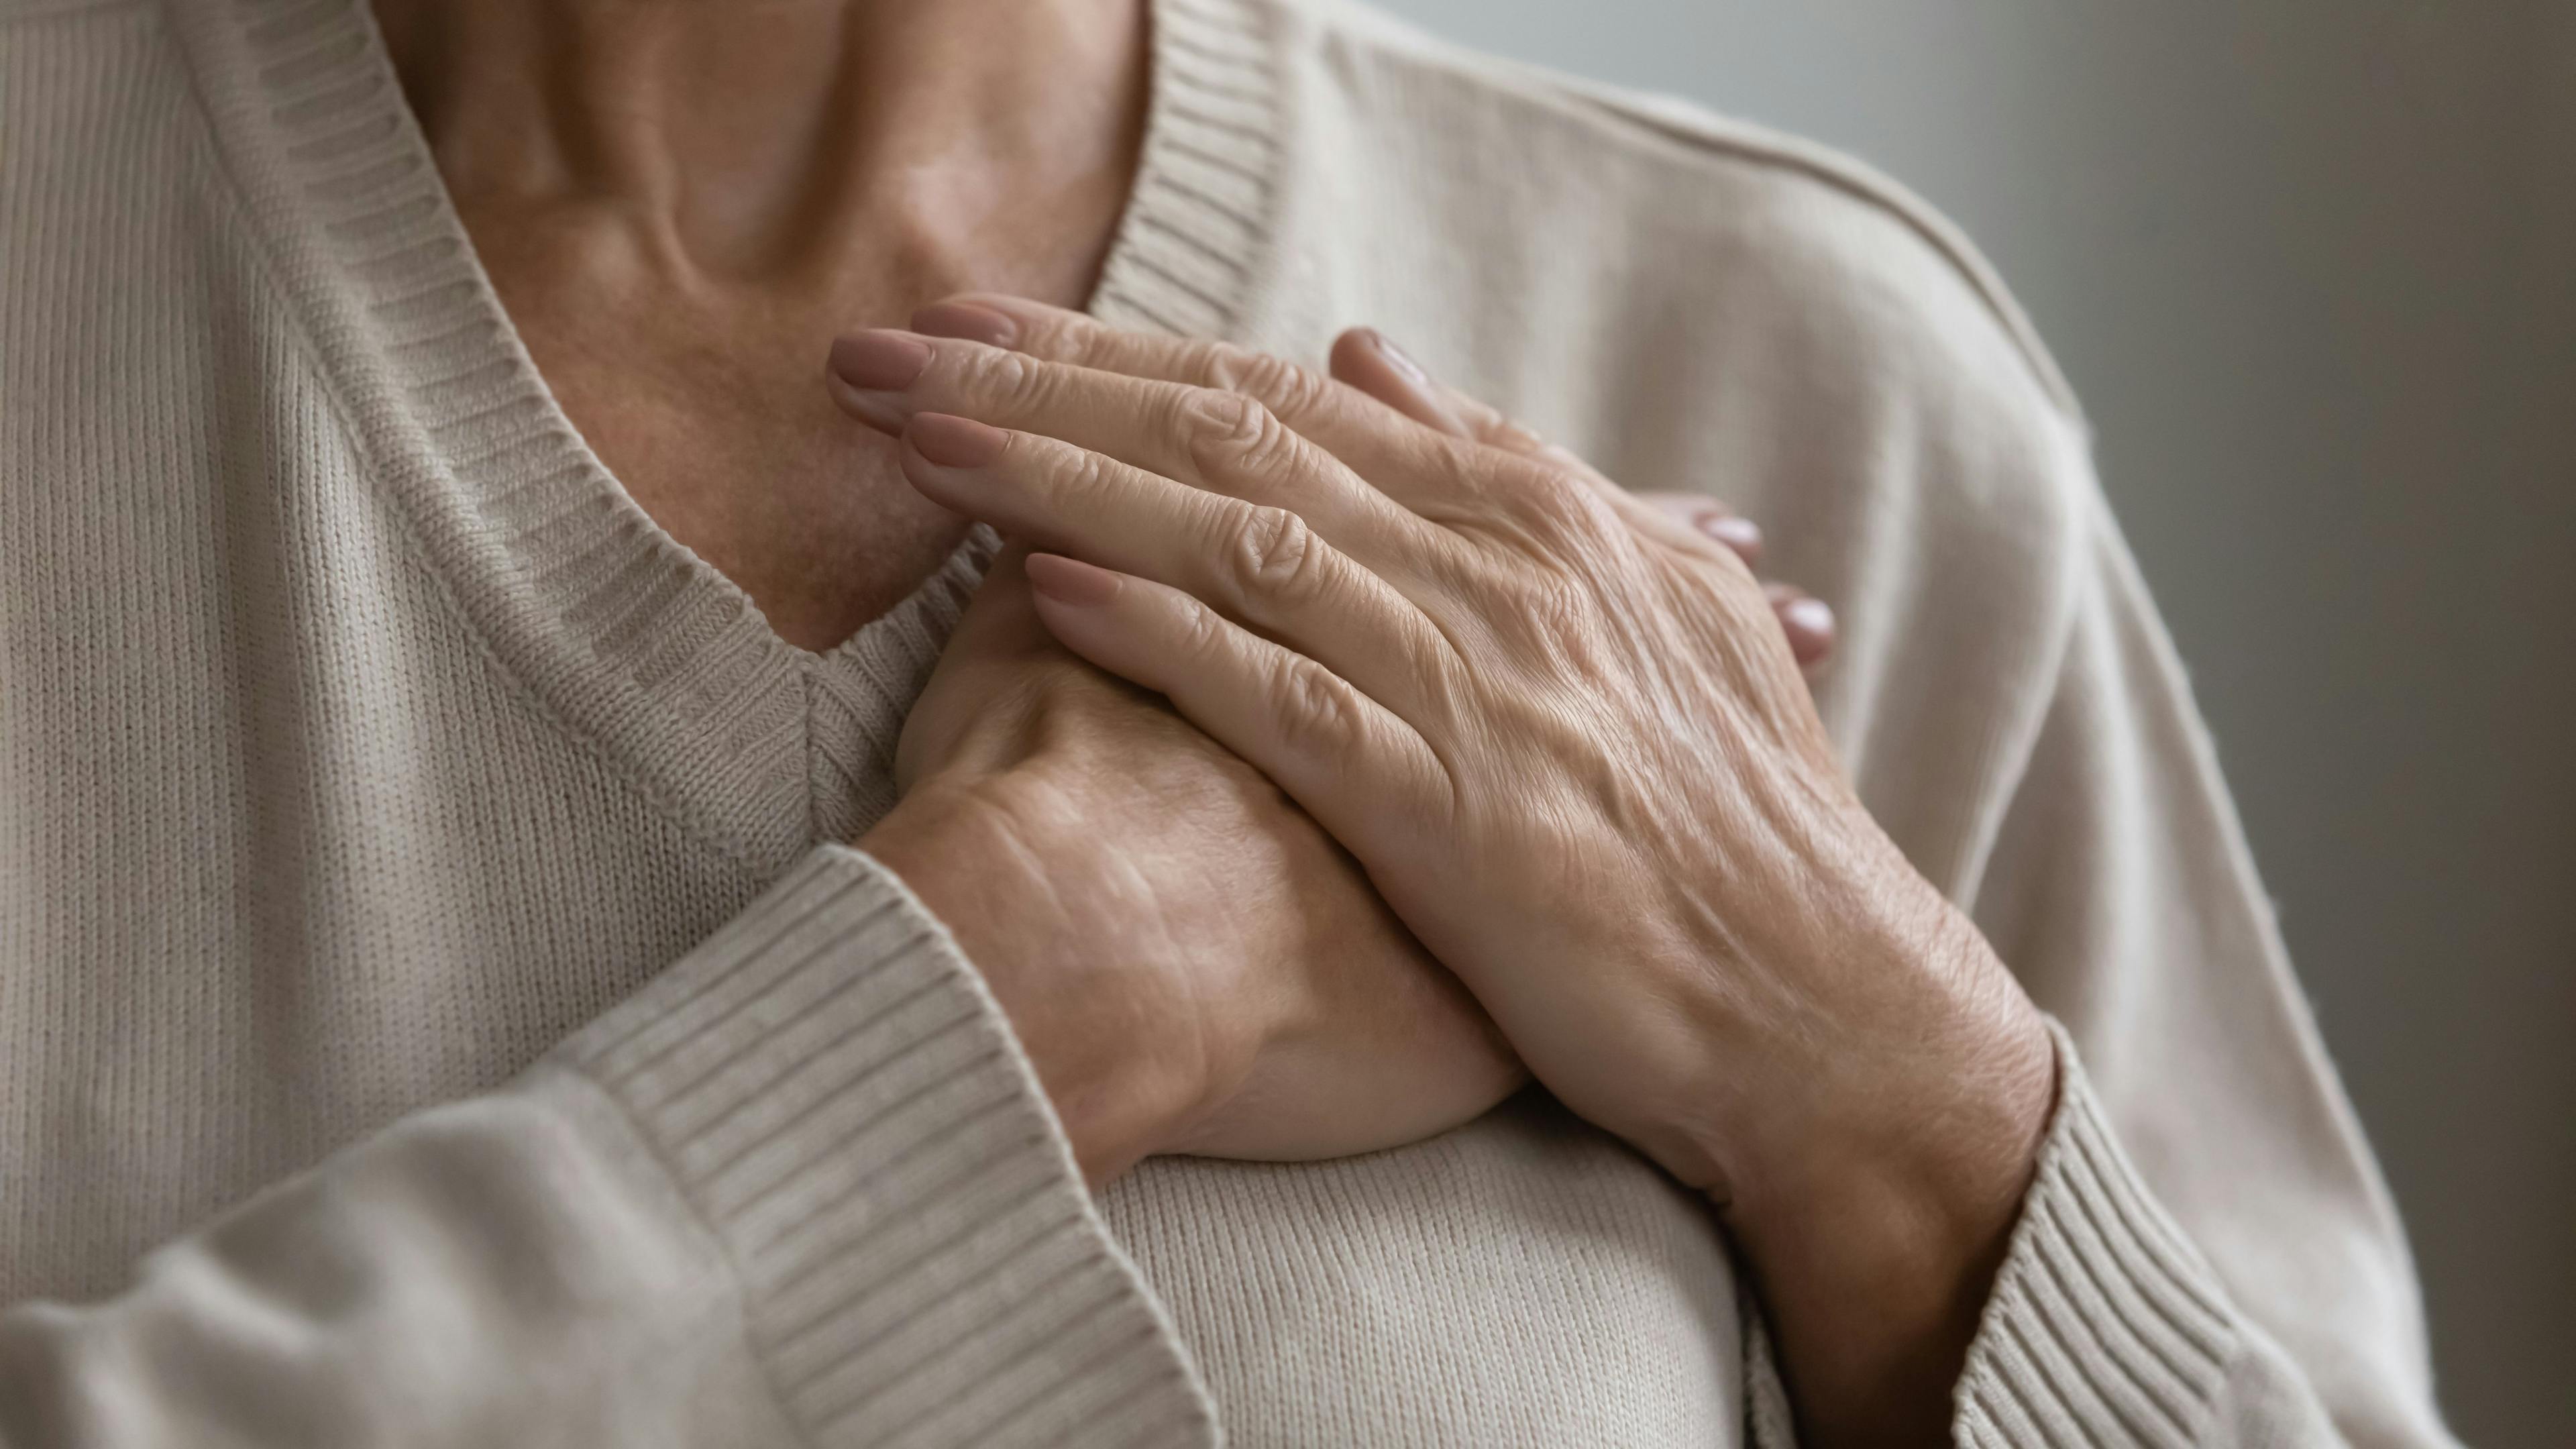 Elderly woman feeling heart pain, touching chest with both hands. | Image Credit: fizkes - stock.adobe.com